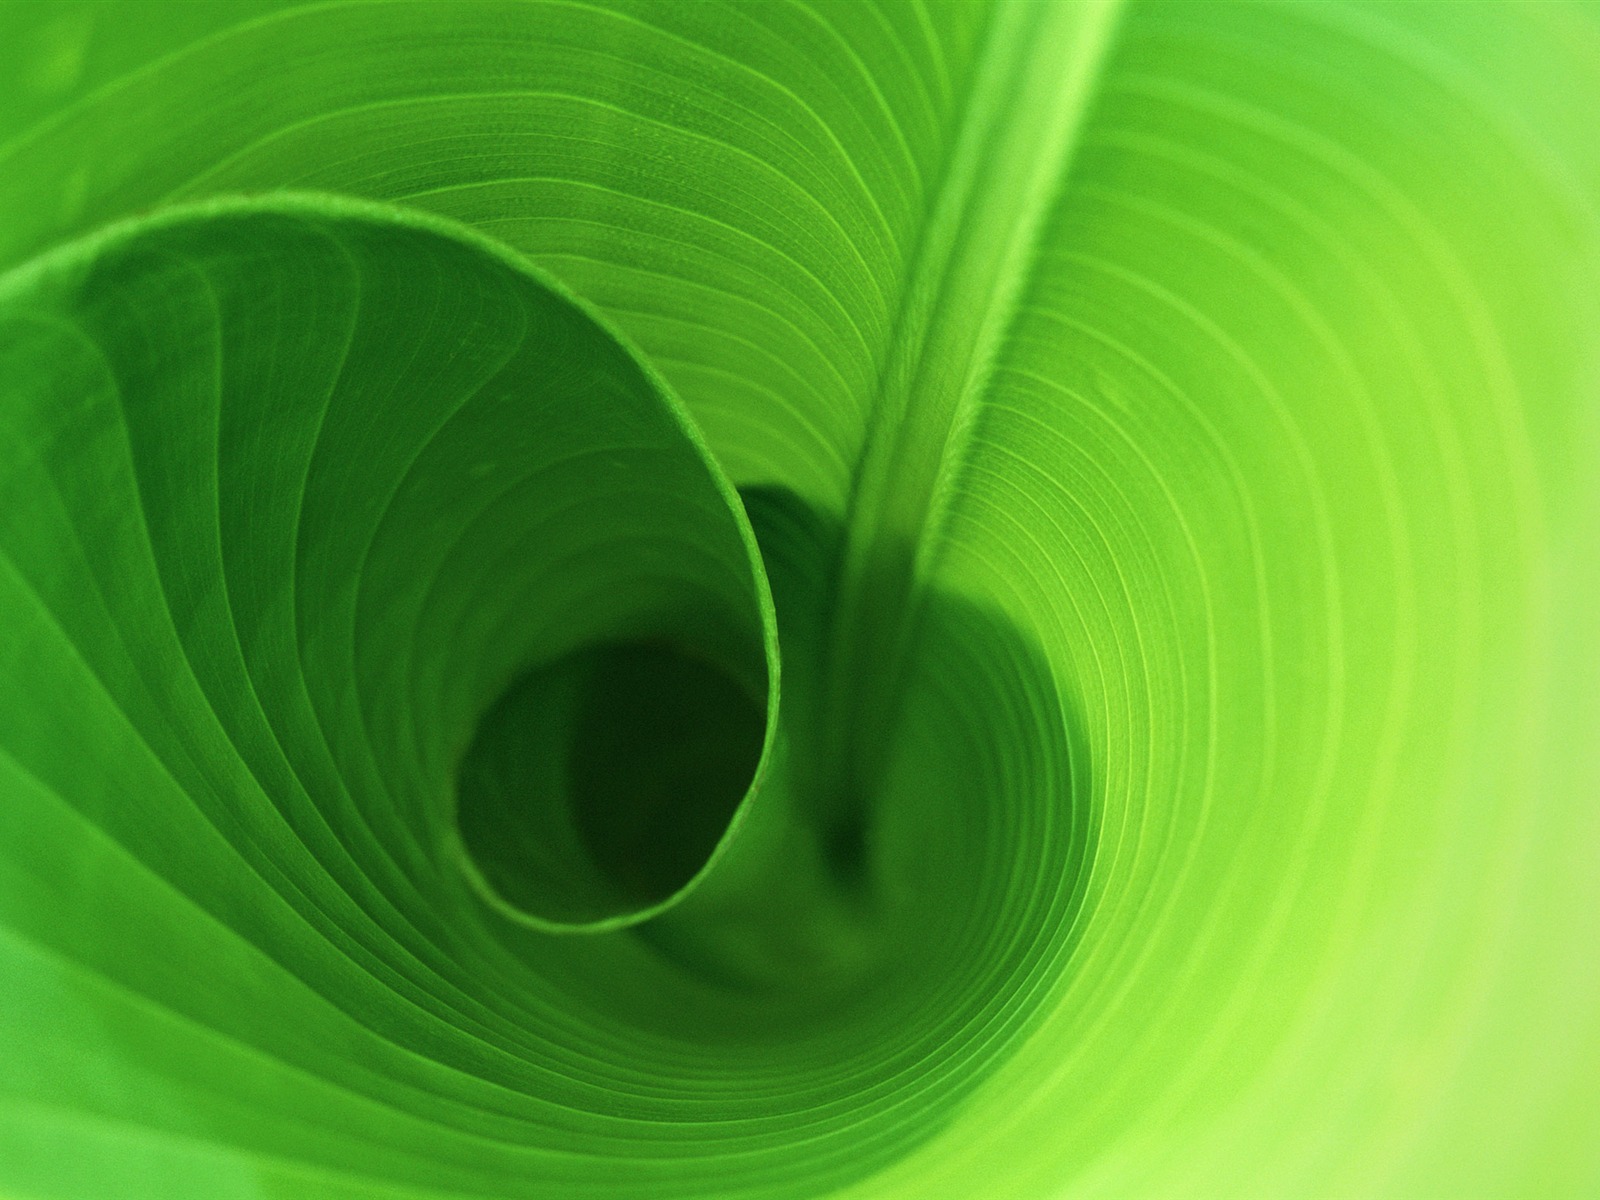 Large green leaves close-up flower wallpaper (2) #3 - 1600x1200